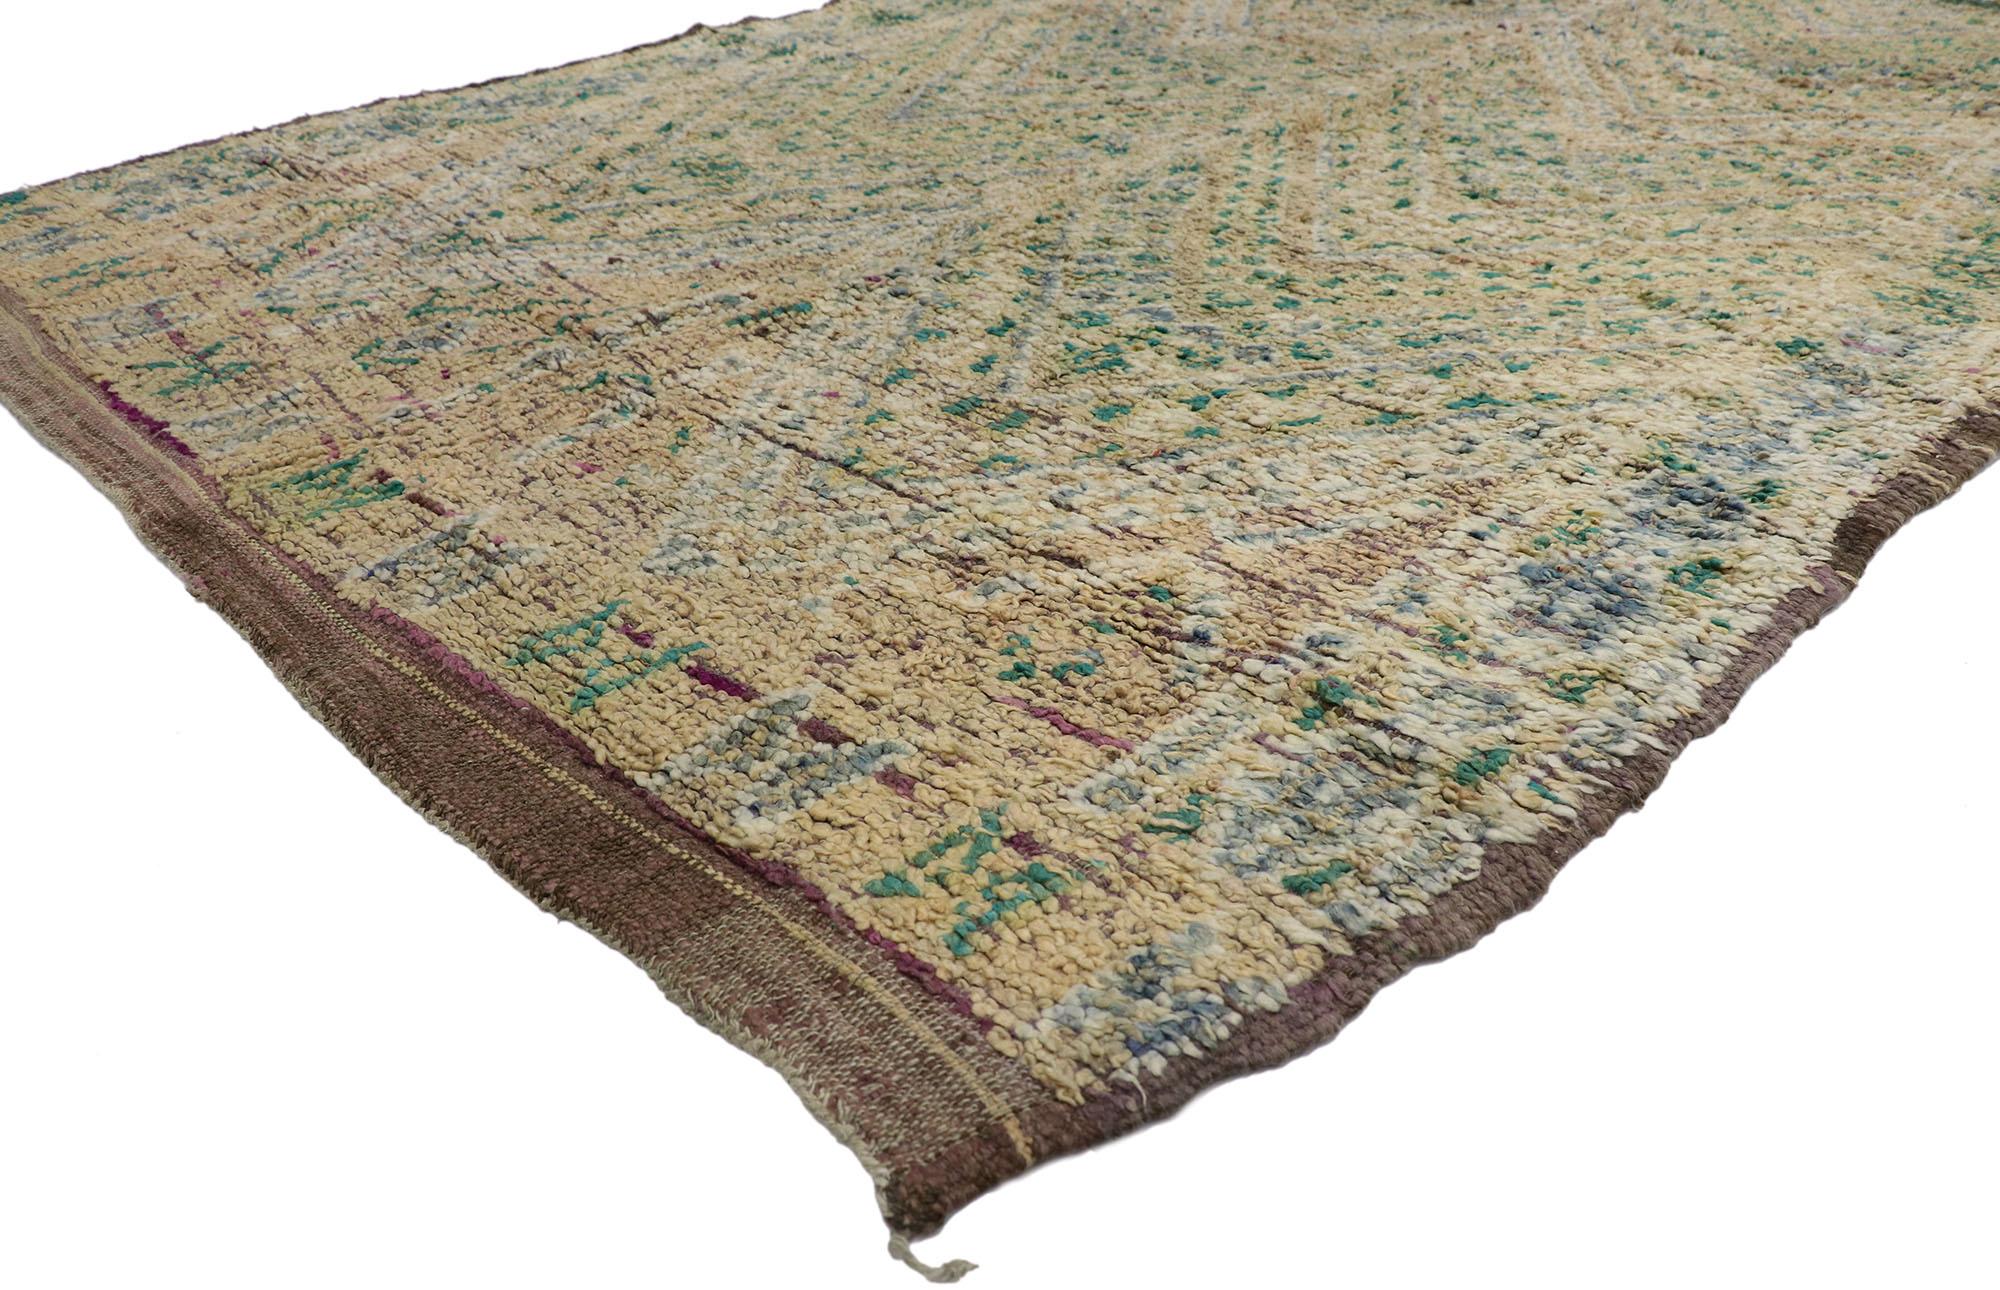 21450 Vintage Beni M'Guild Moroccan Rug, 05'08 x 08'10
Emanating nomadic charm with incredible detail and texture, this hand knotted wool vintage Moroccan rug is a captivating vision of woven beauty. The eye-catching tribal design and bohemian